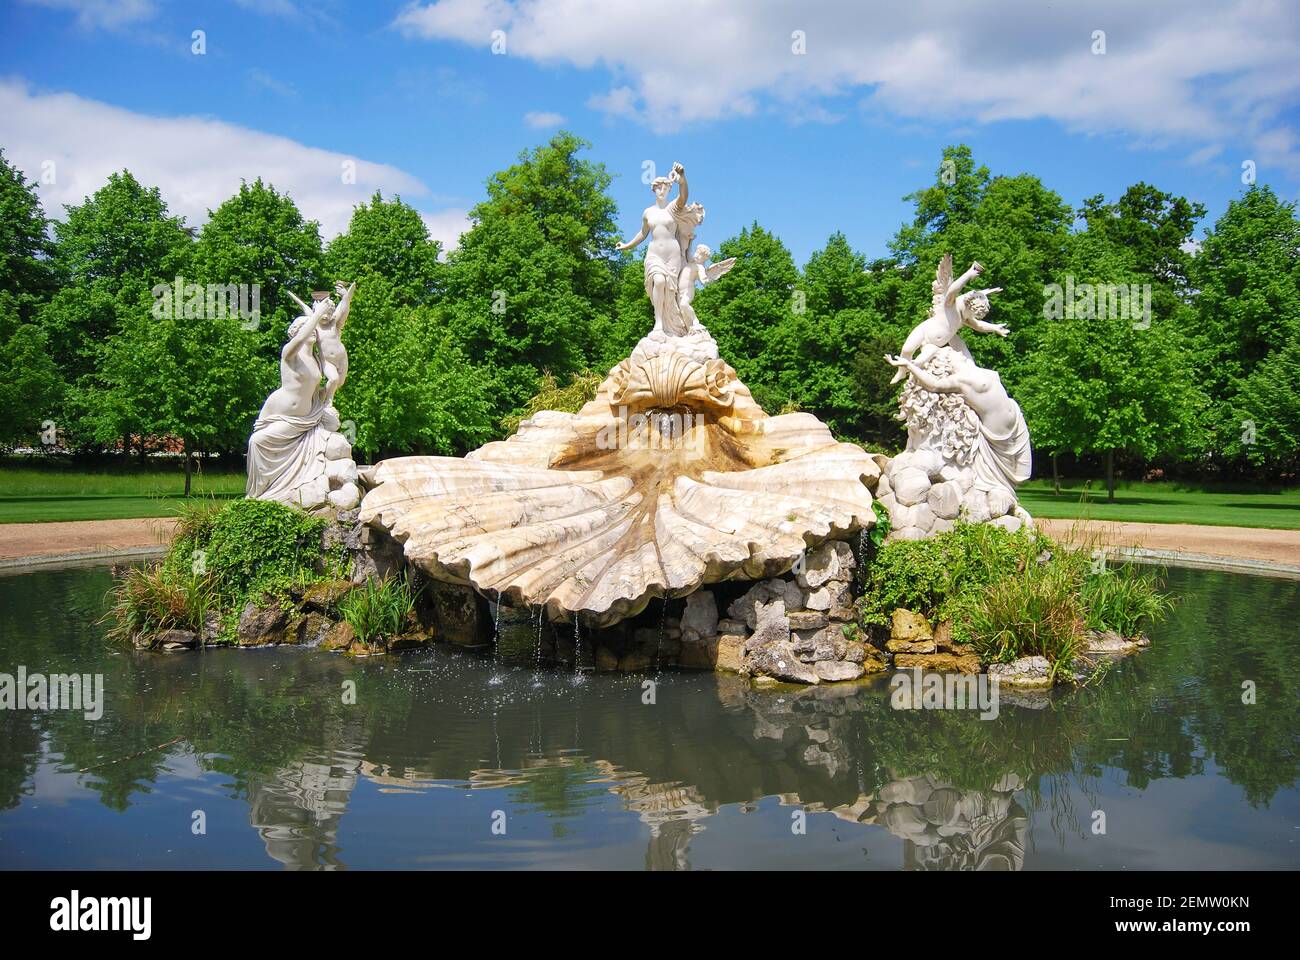 Fountain of Love, Cliveden, Taplow, Buckinghamshire, England, United Kingdom Stock Photo